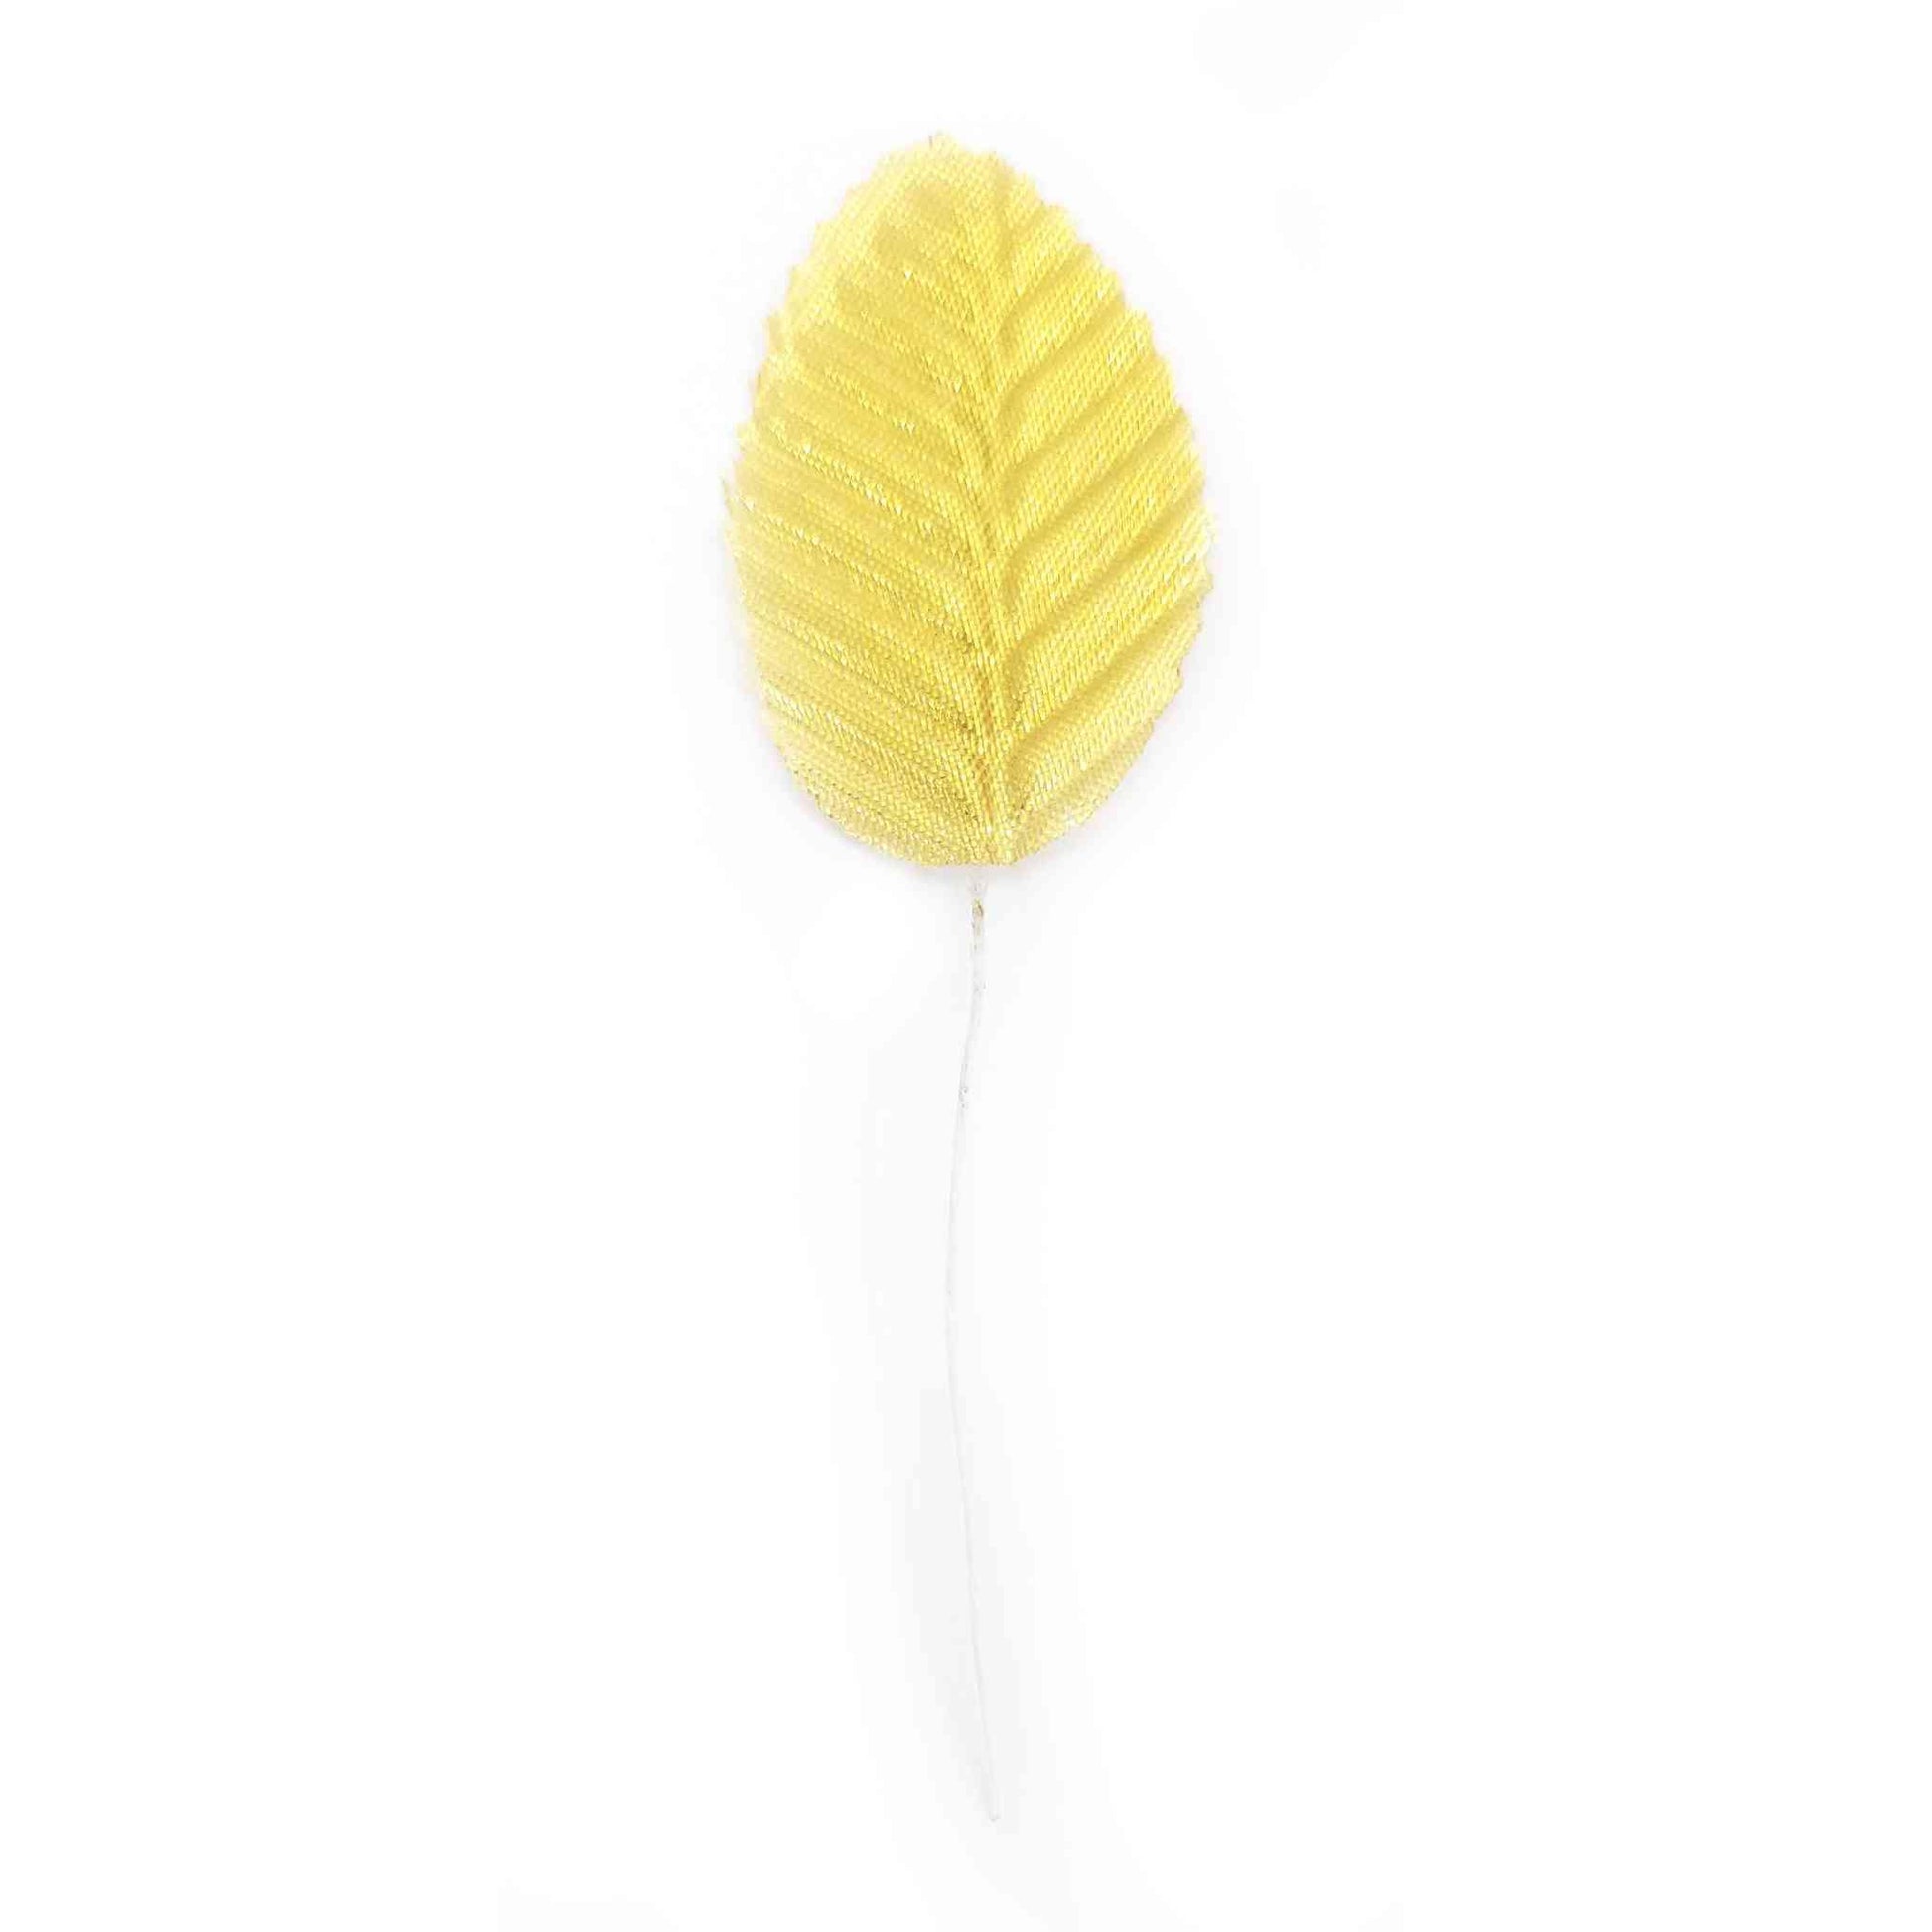 Indian Petals Beautiful Fabric Leaf for DIY Craft, Trouseau Packing or Decoration (Bunch of 12) - Design 60, Goldenrod - Indian Petals